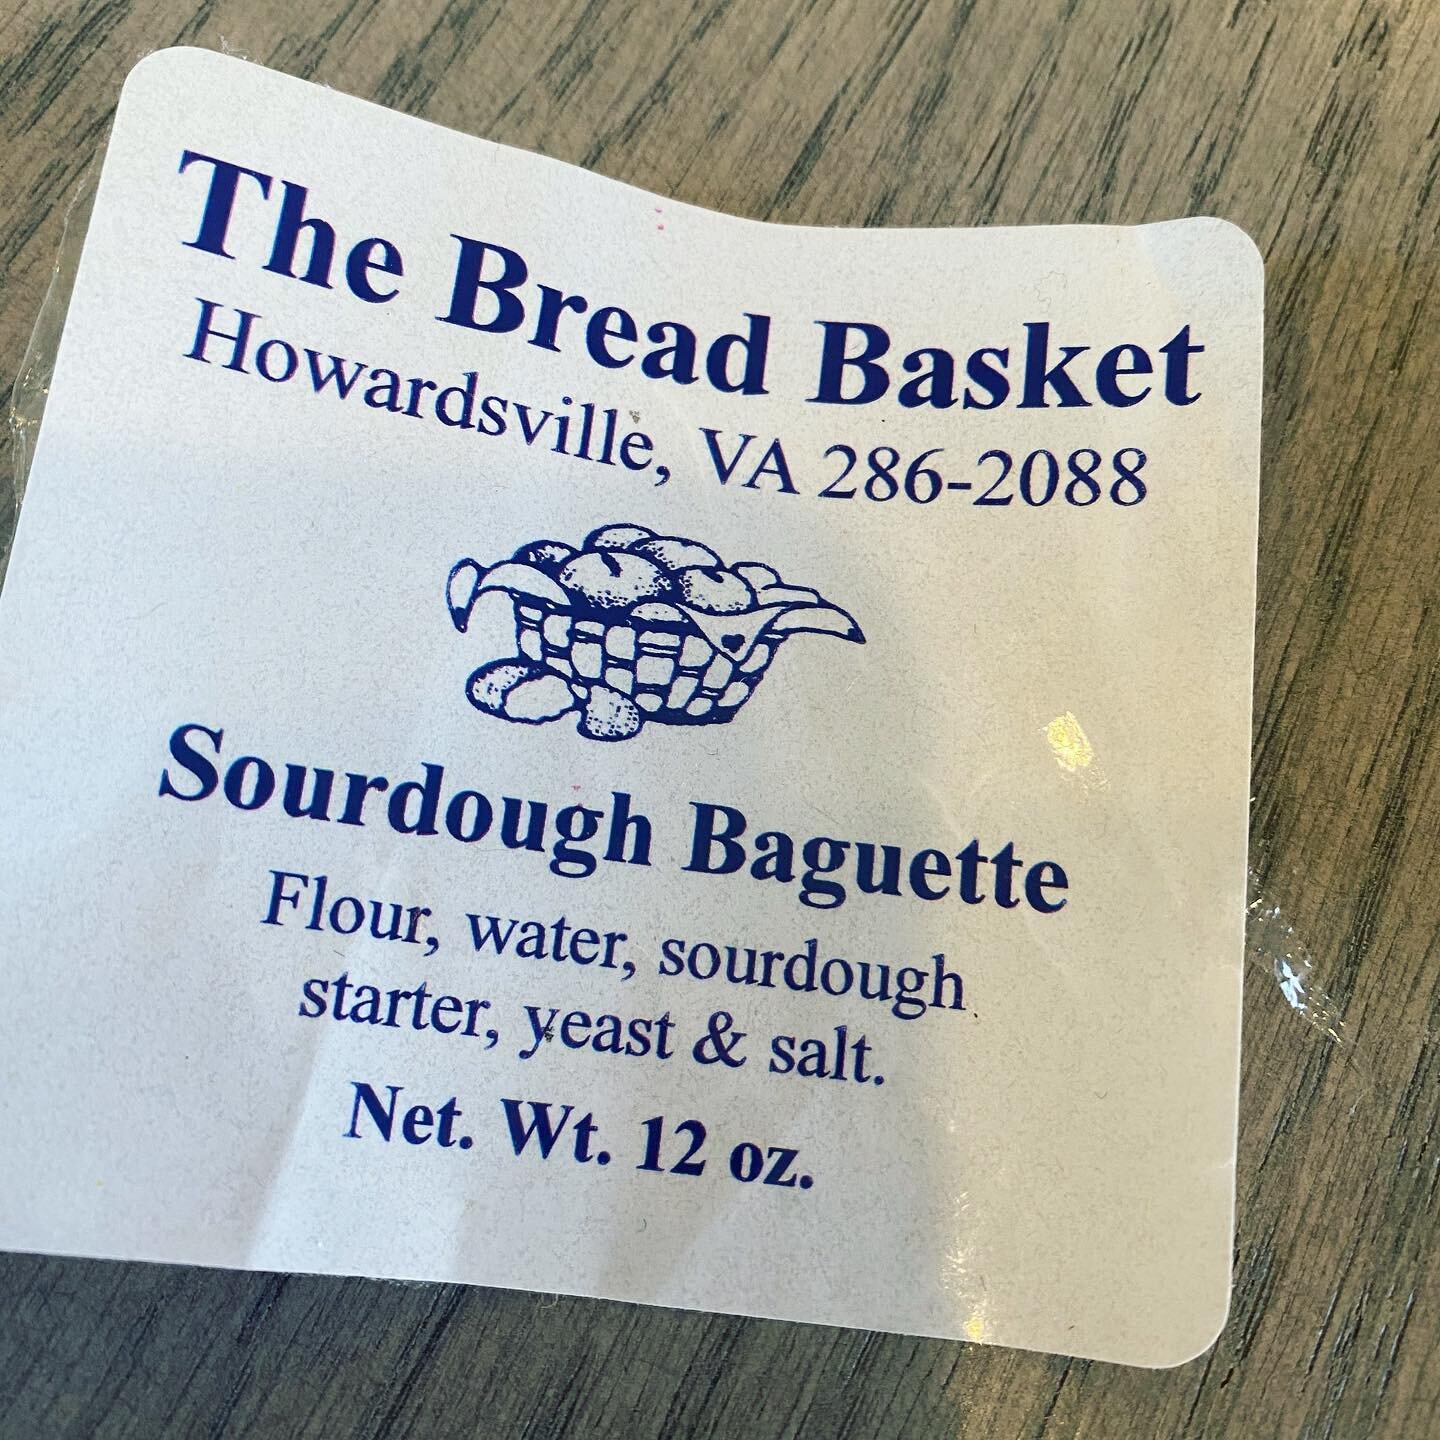 Does anyone sell this amazing bread in RVA? 

#rvafoodie #rva #rvabread